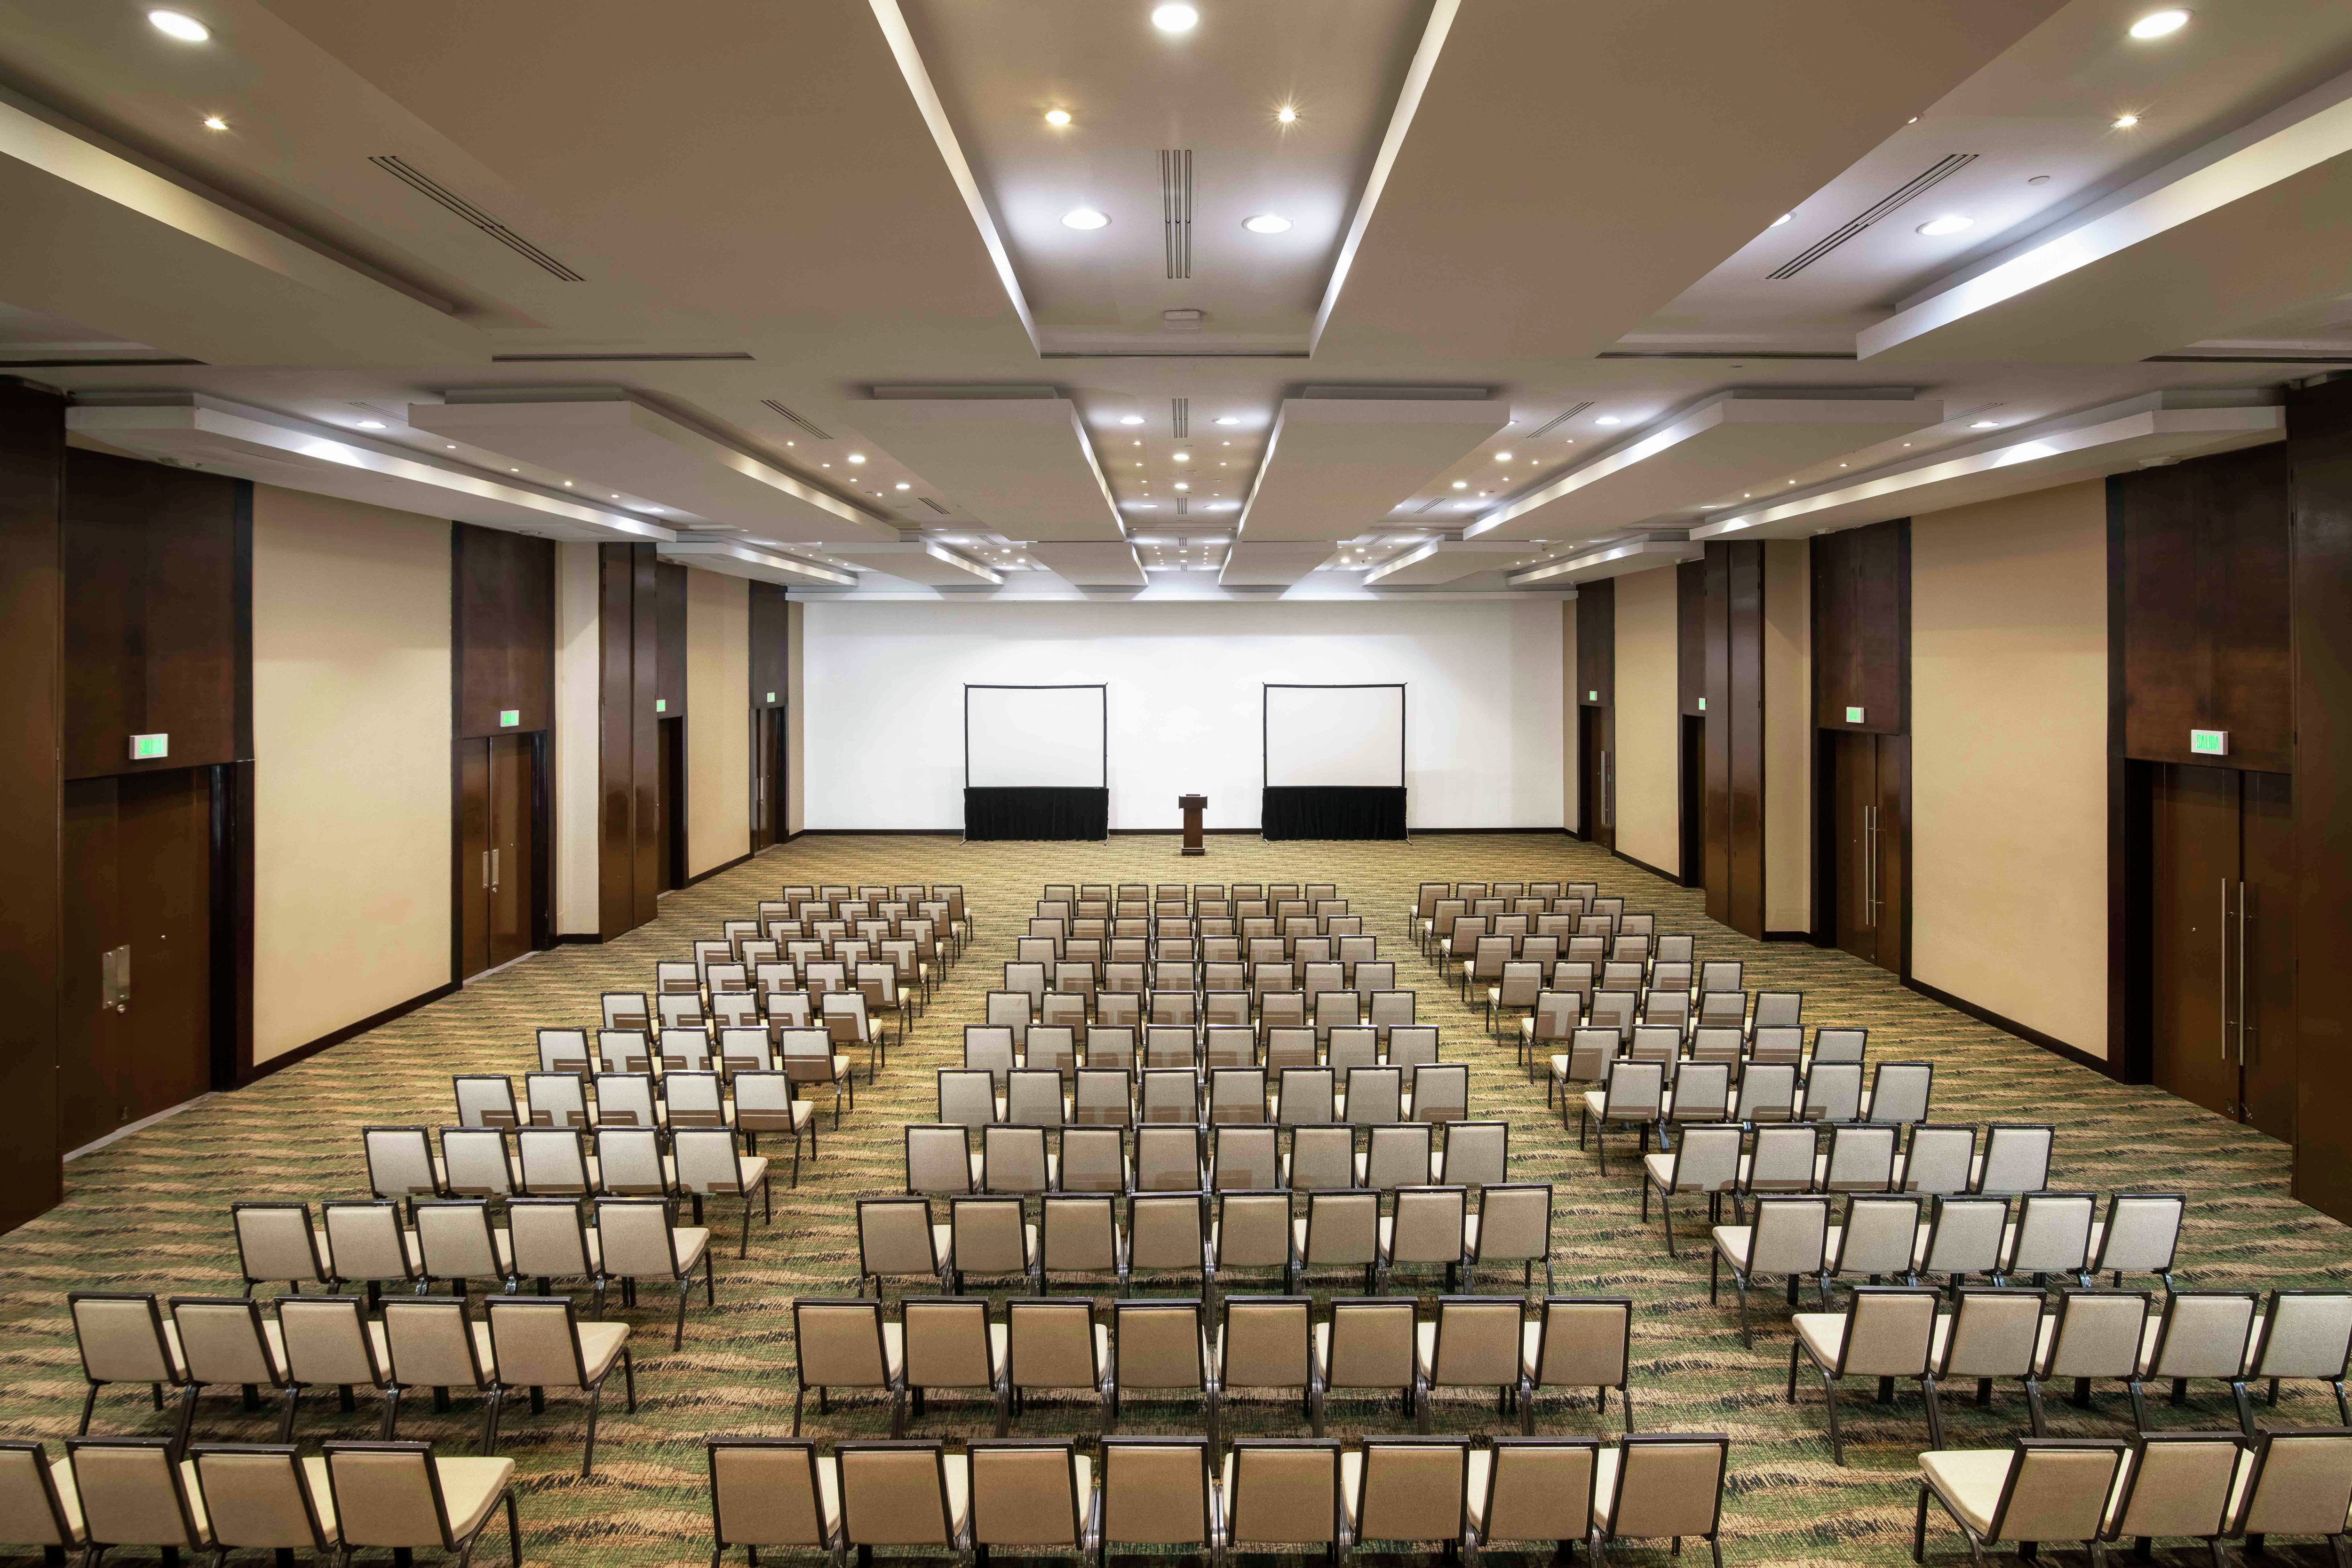 Large Meeting Room with Rows of Chairs